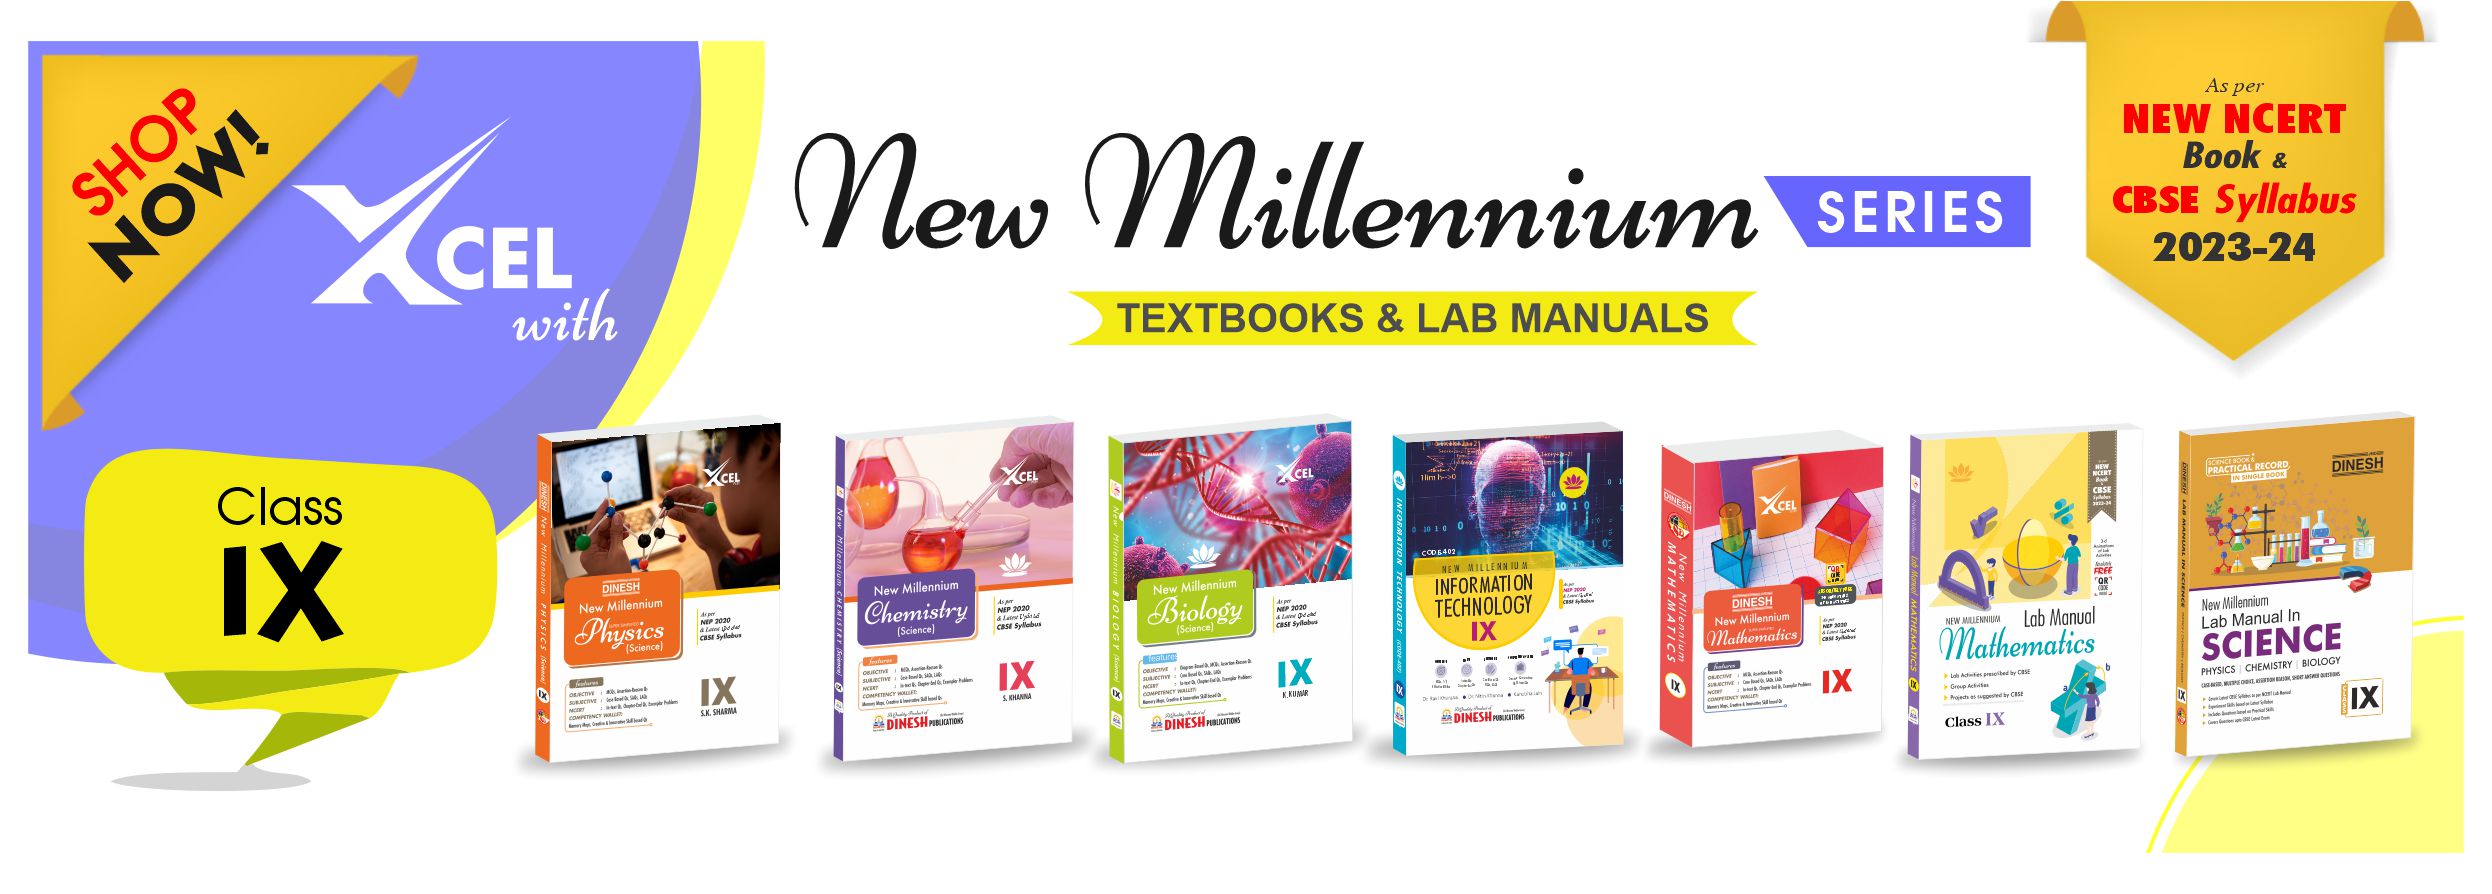 NCERT Textbooks and Lab Manuals